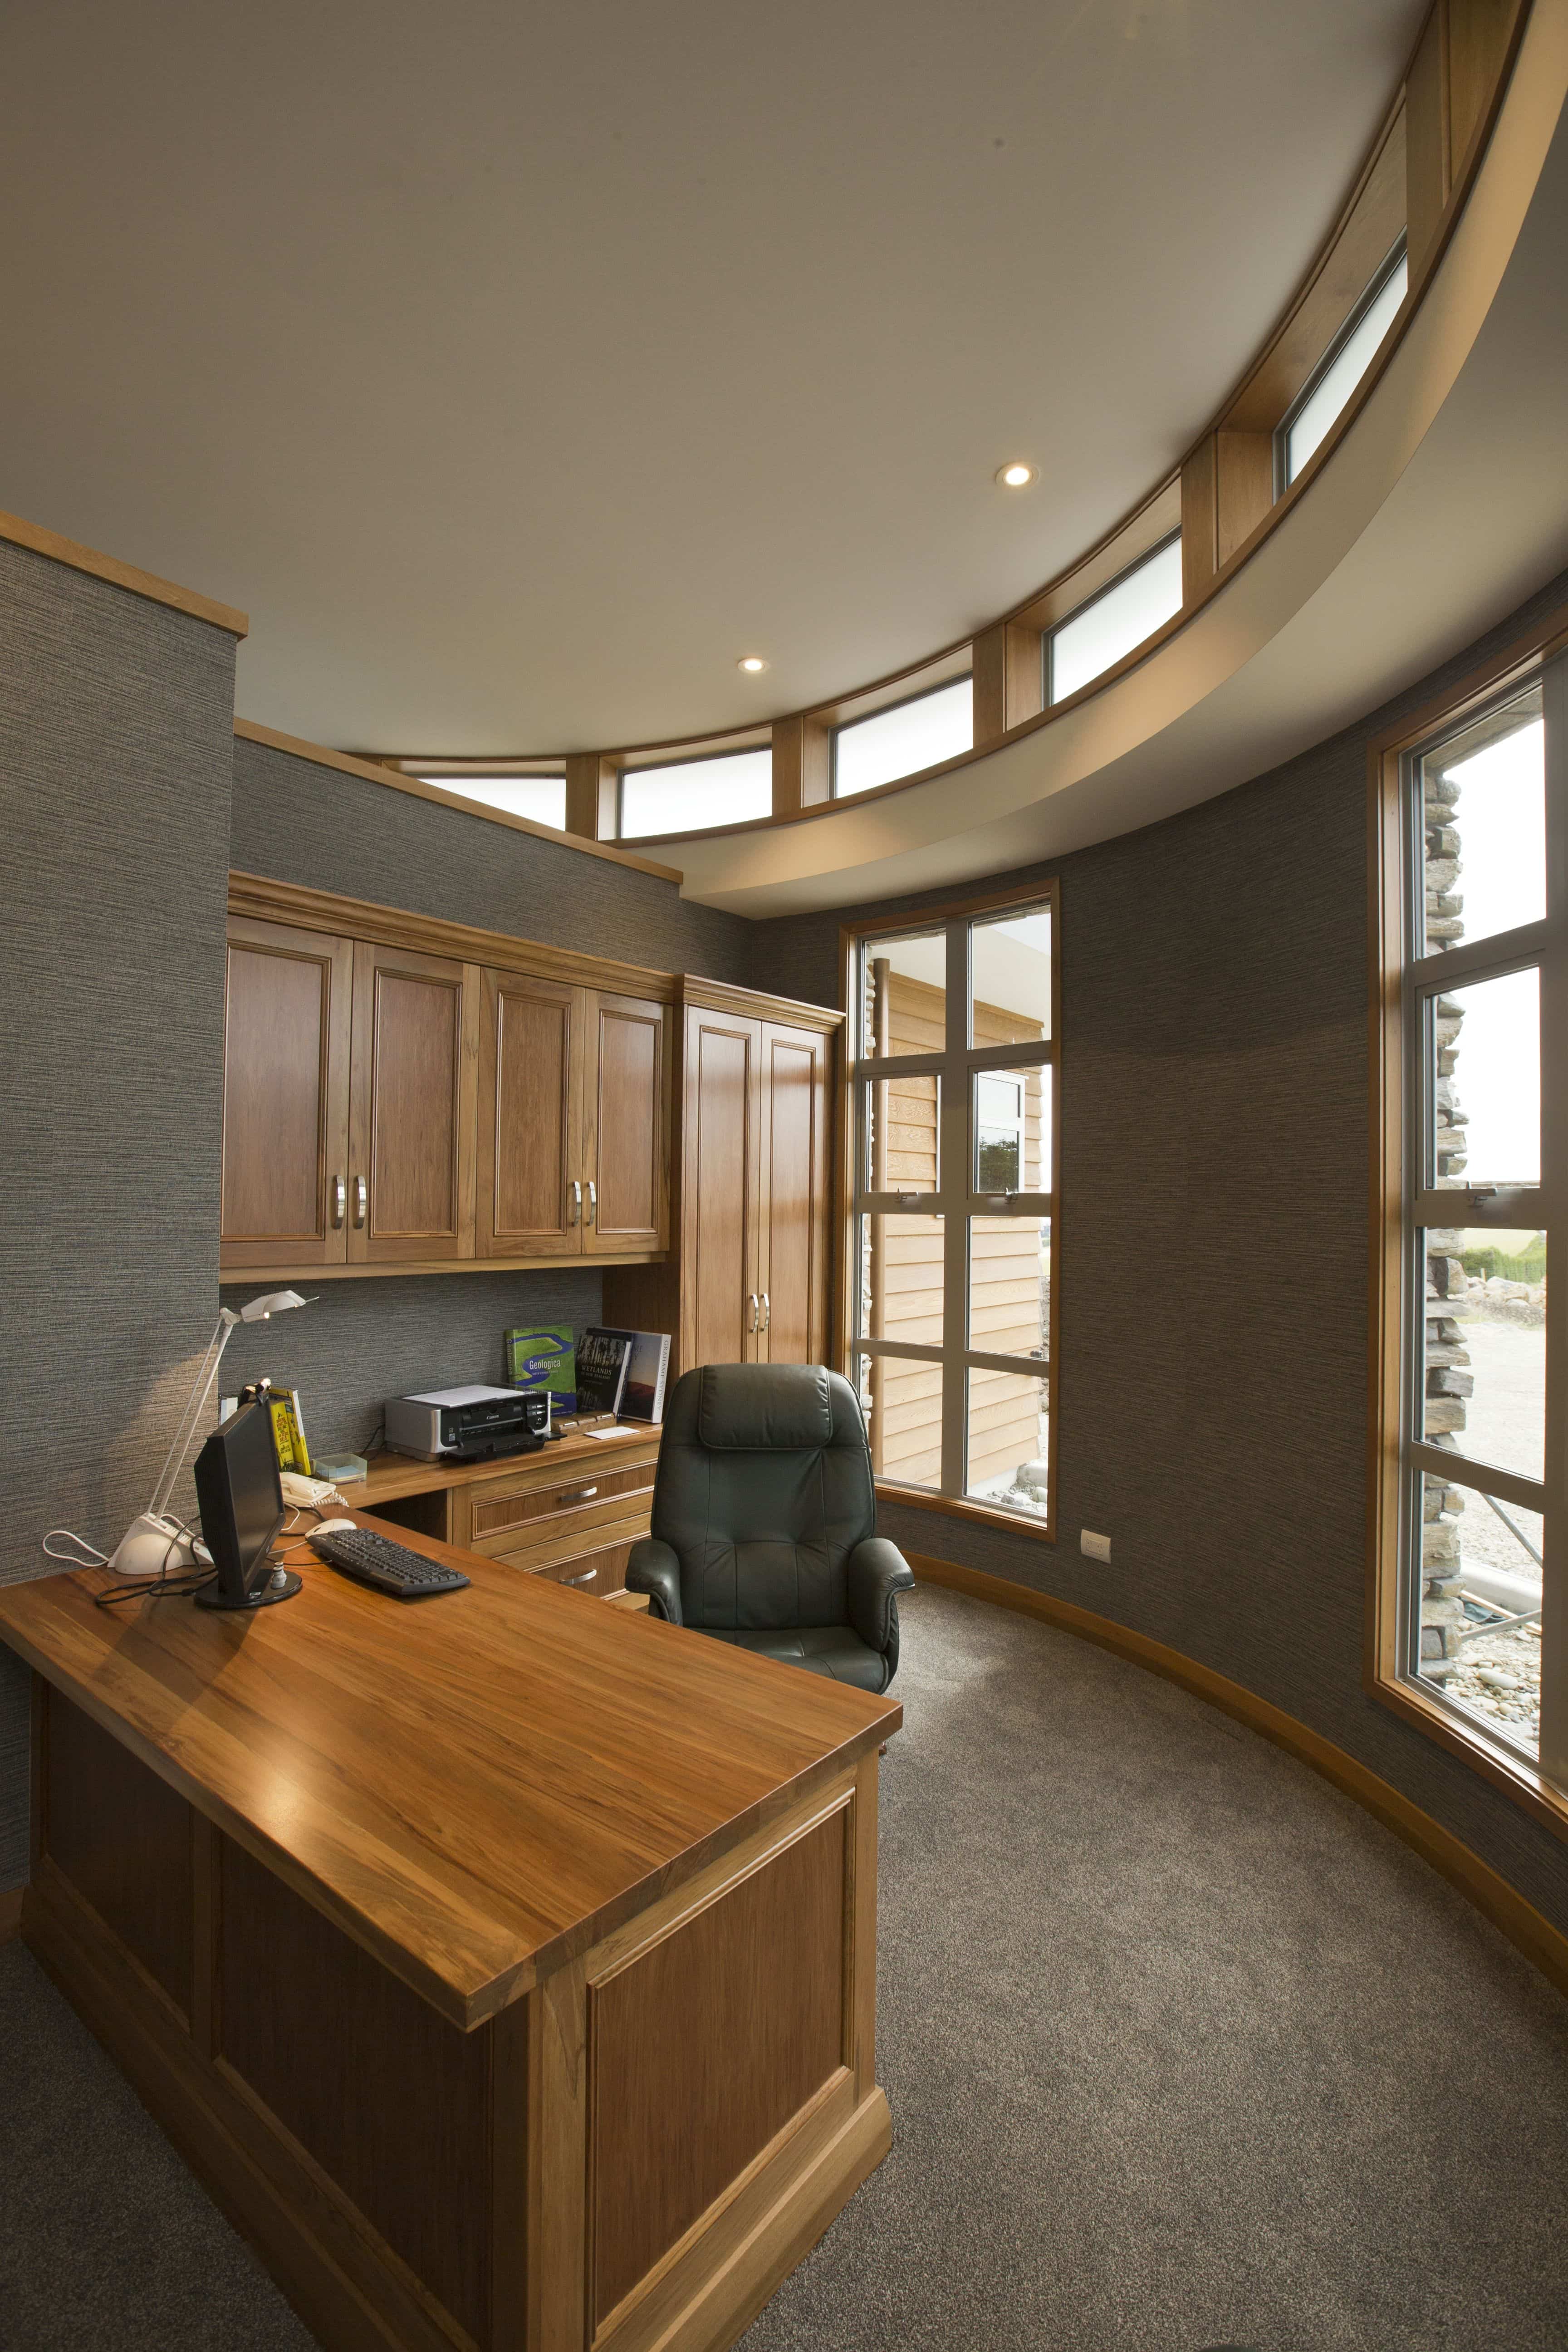  This beautiful home office has textured wallpaper on the curved wall to add interest.